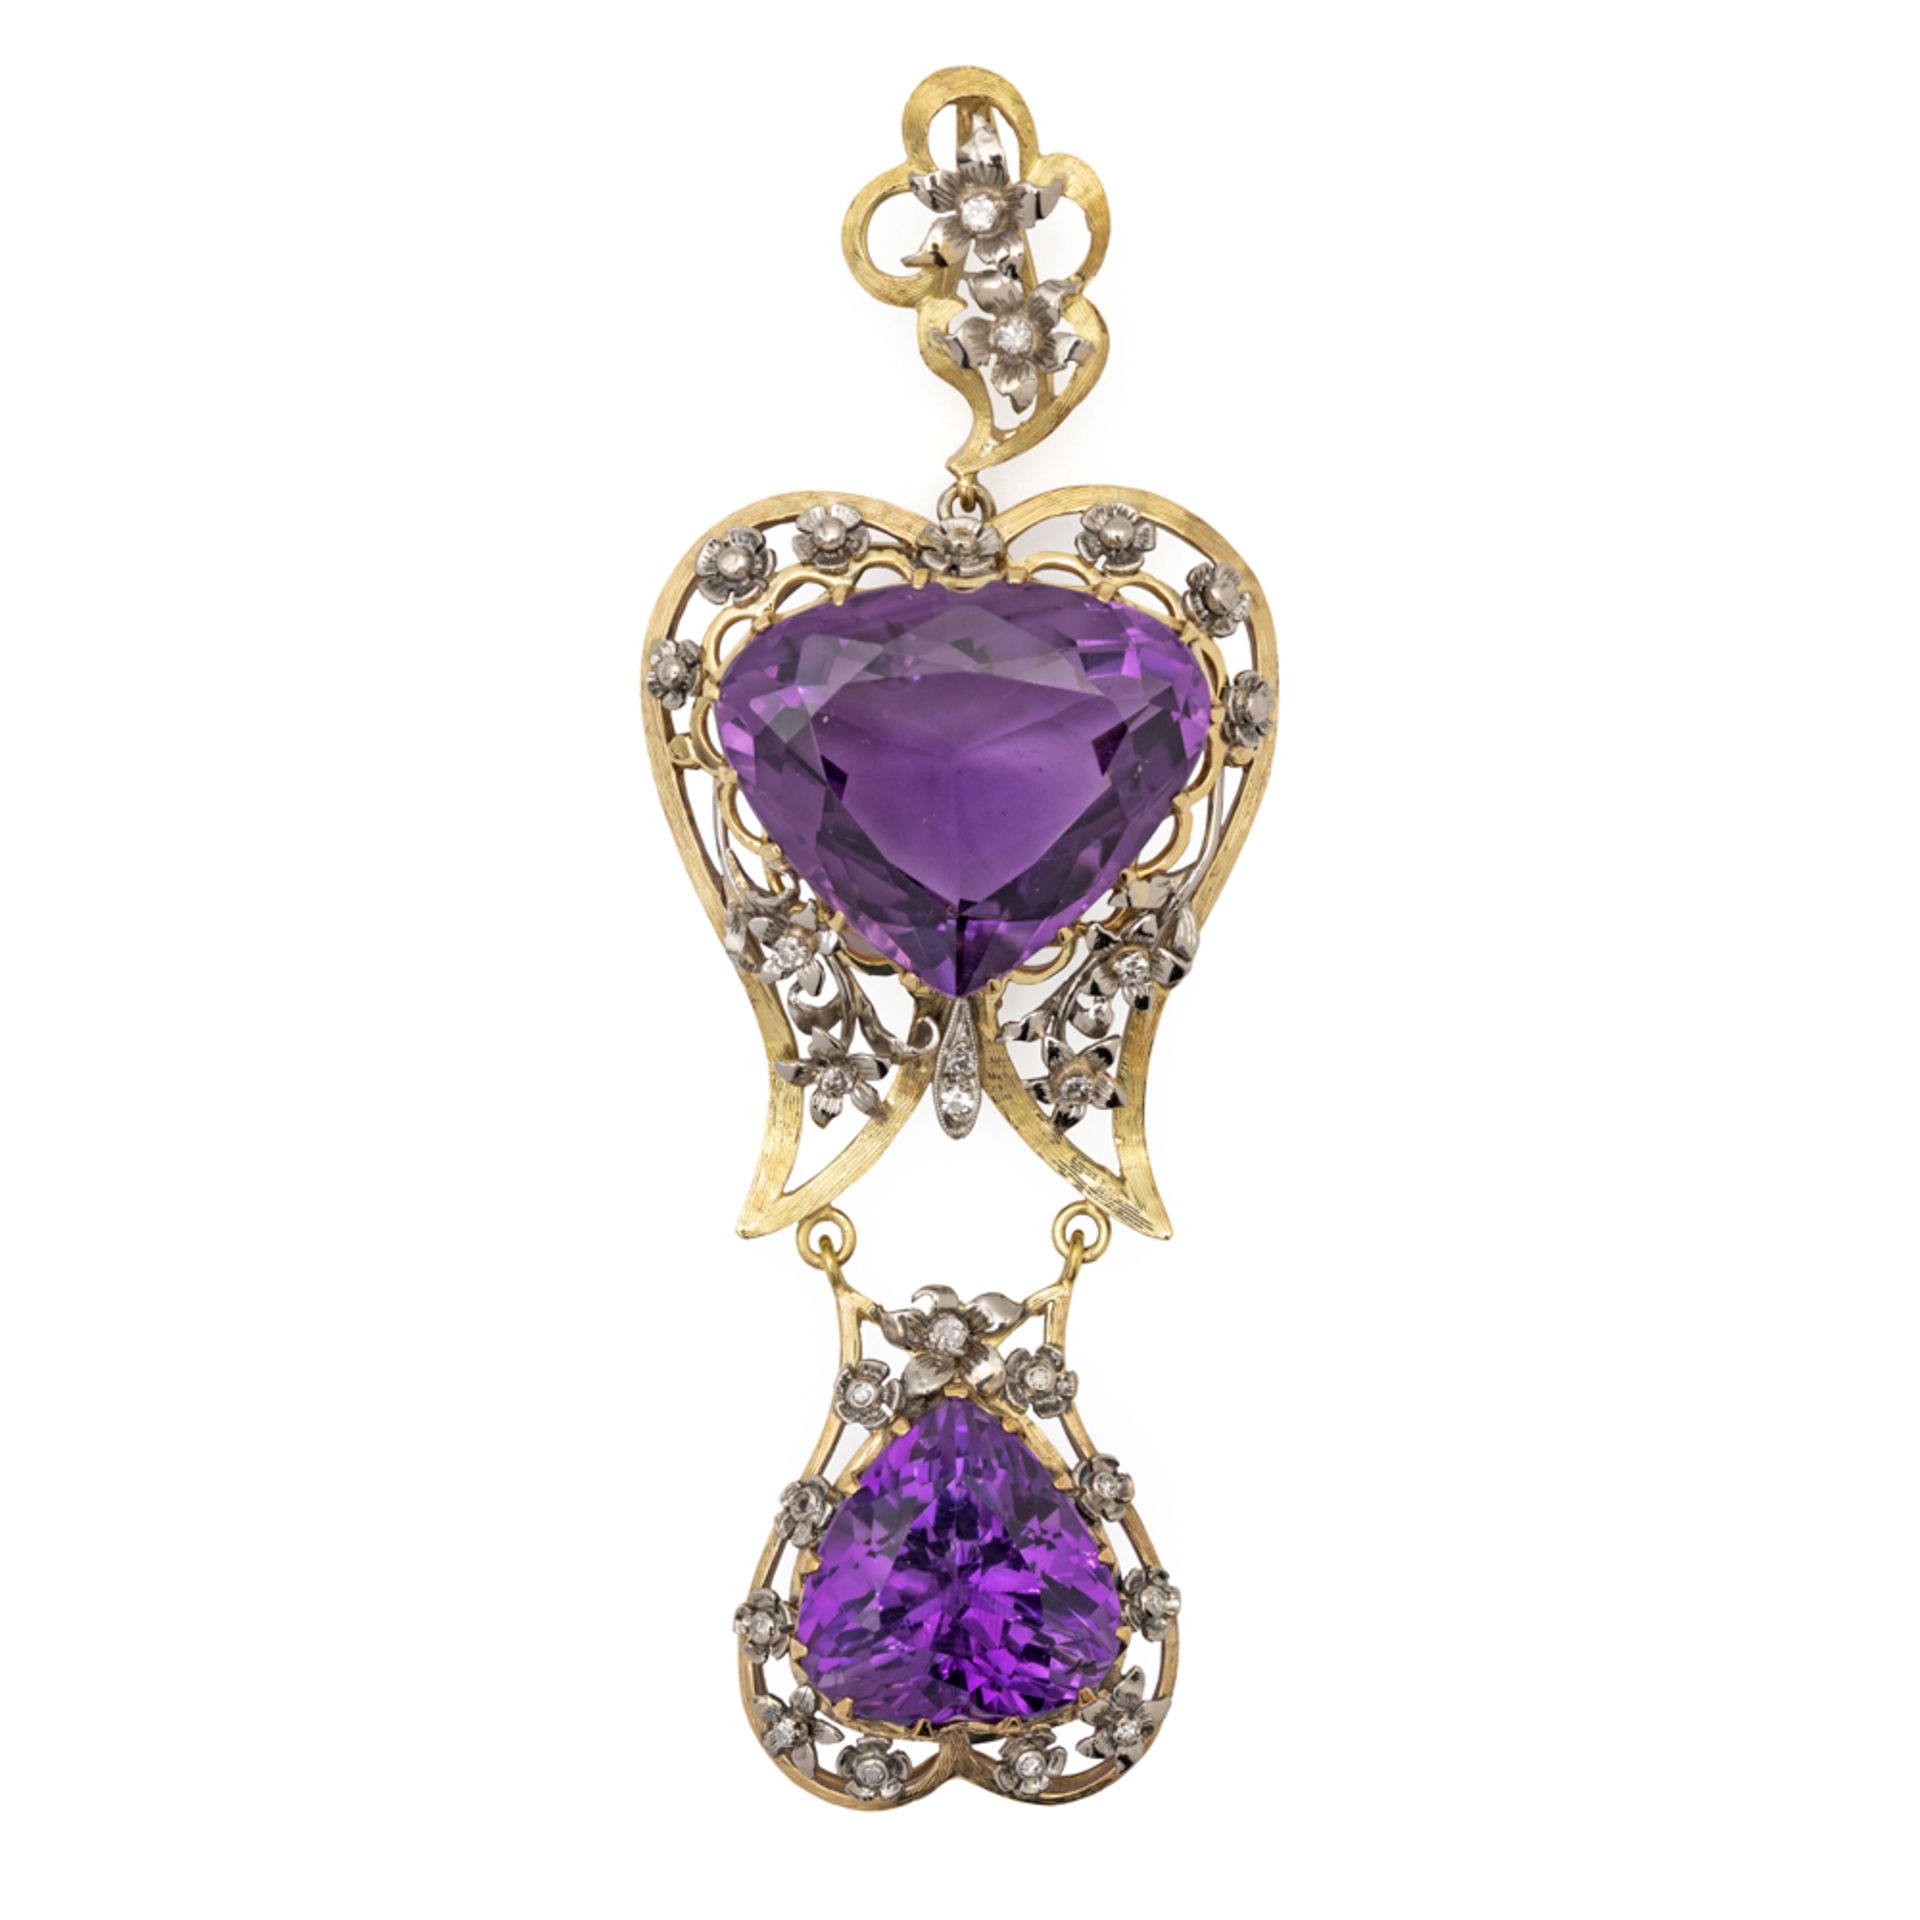 18kt yellow and white gold and amethyst pendant